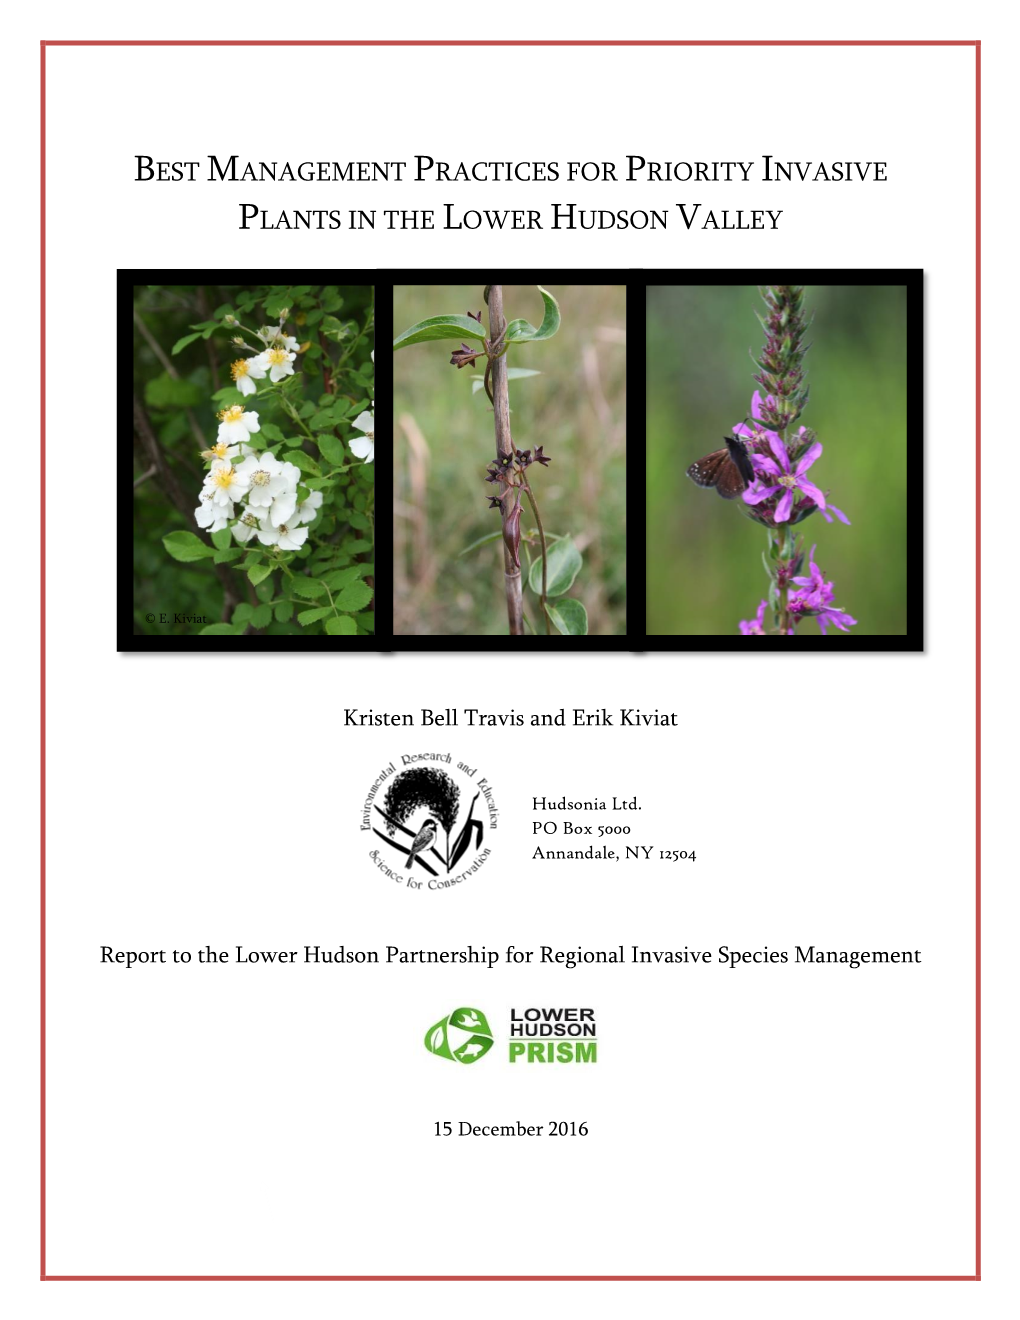 Best Management Practices for Priority Invasive Plants in the Lower Hudson Valley